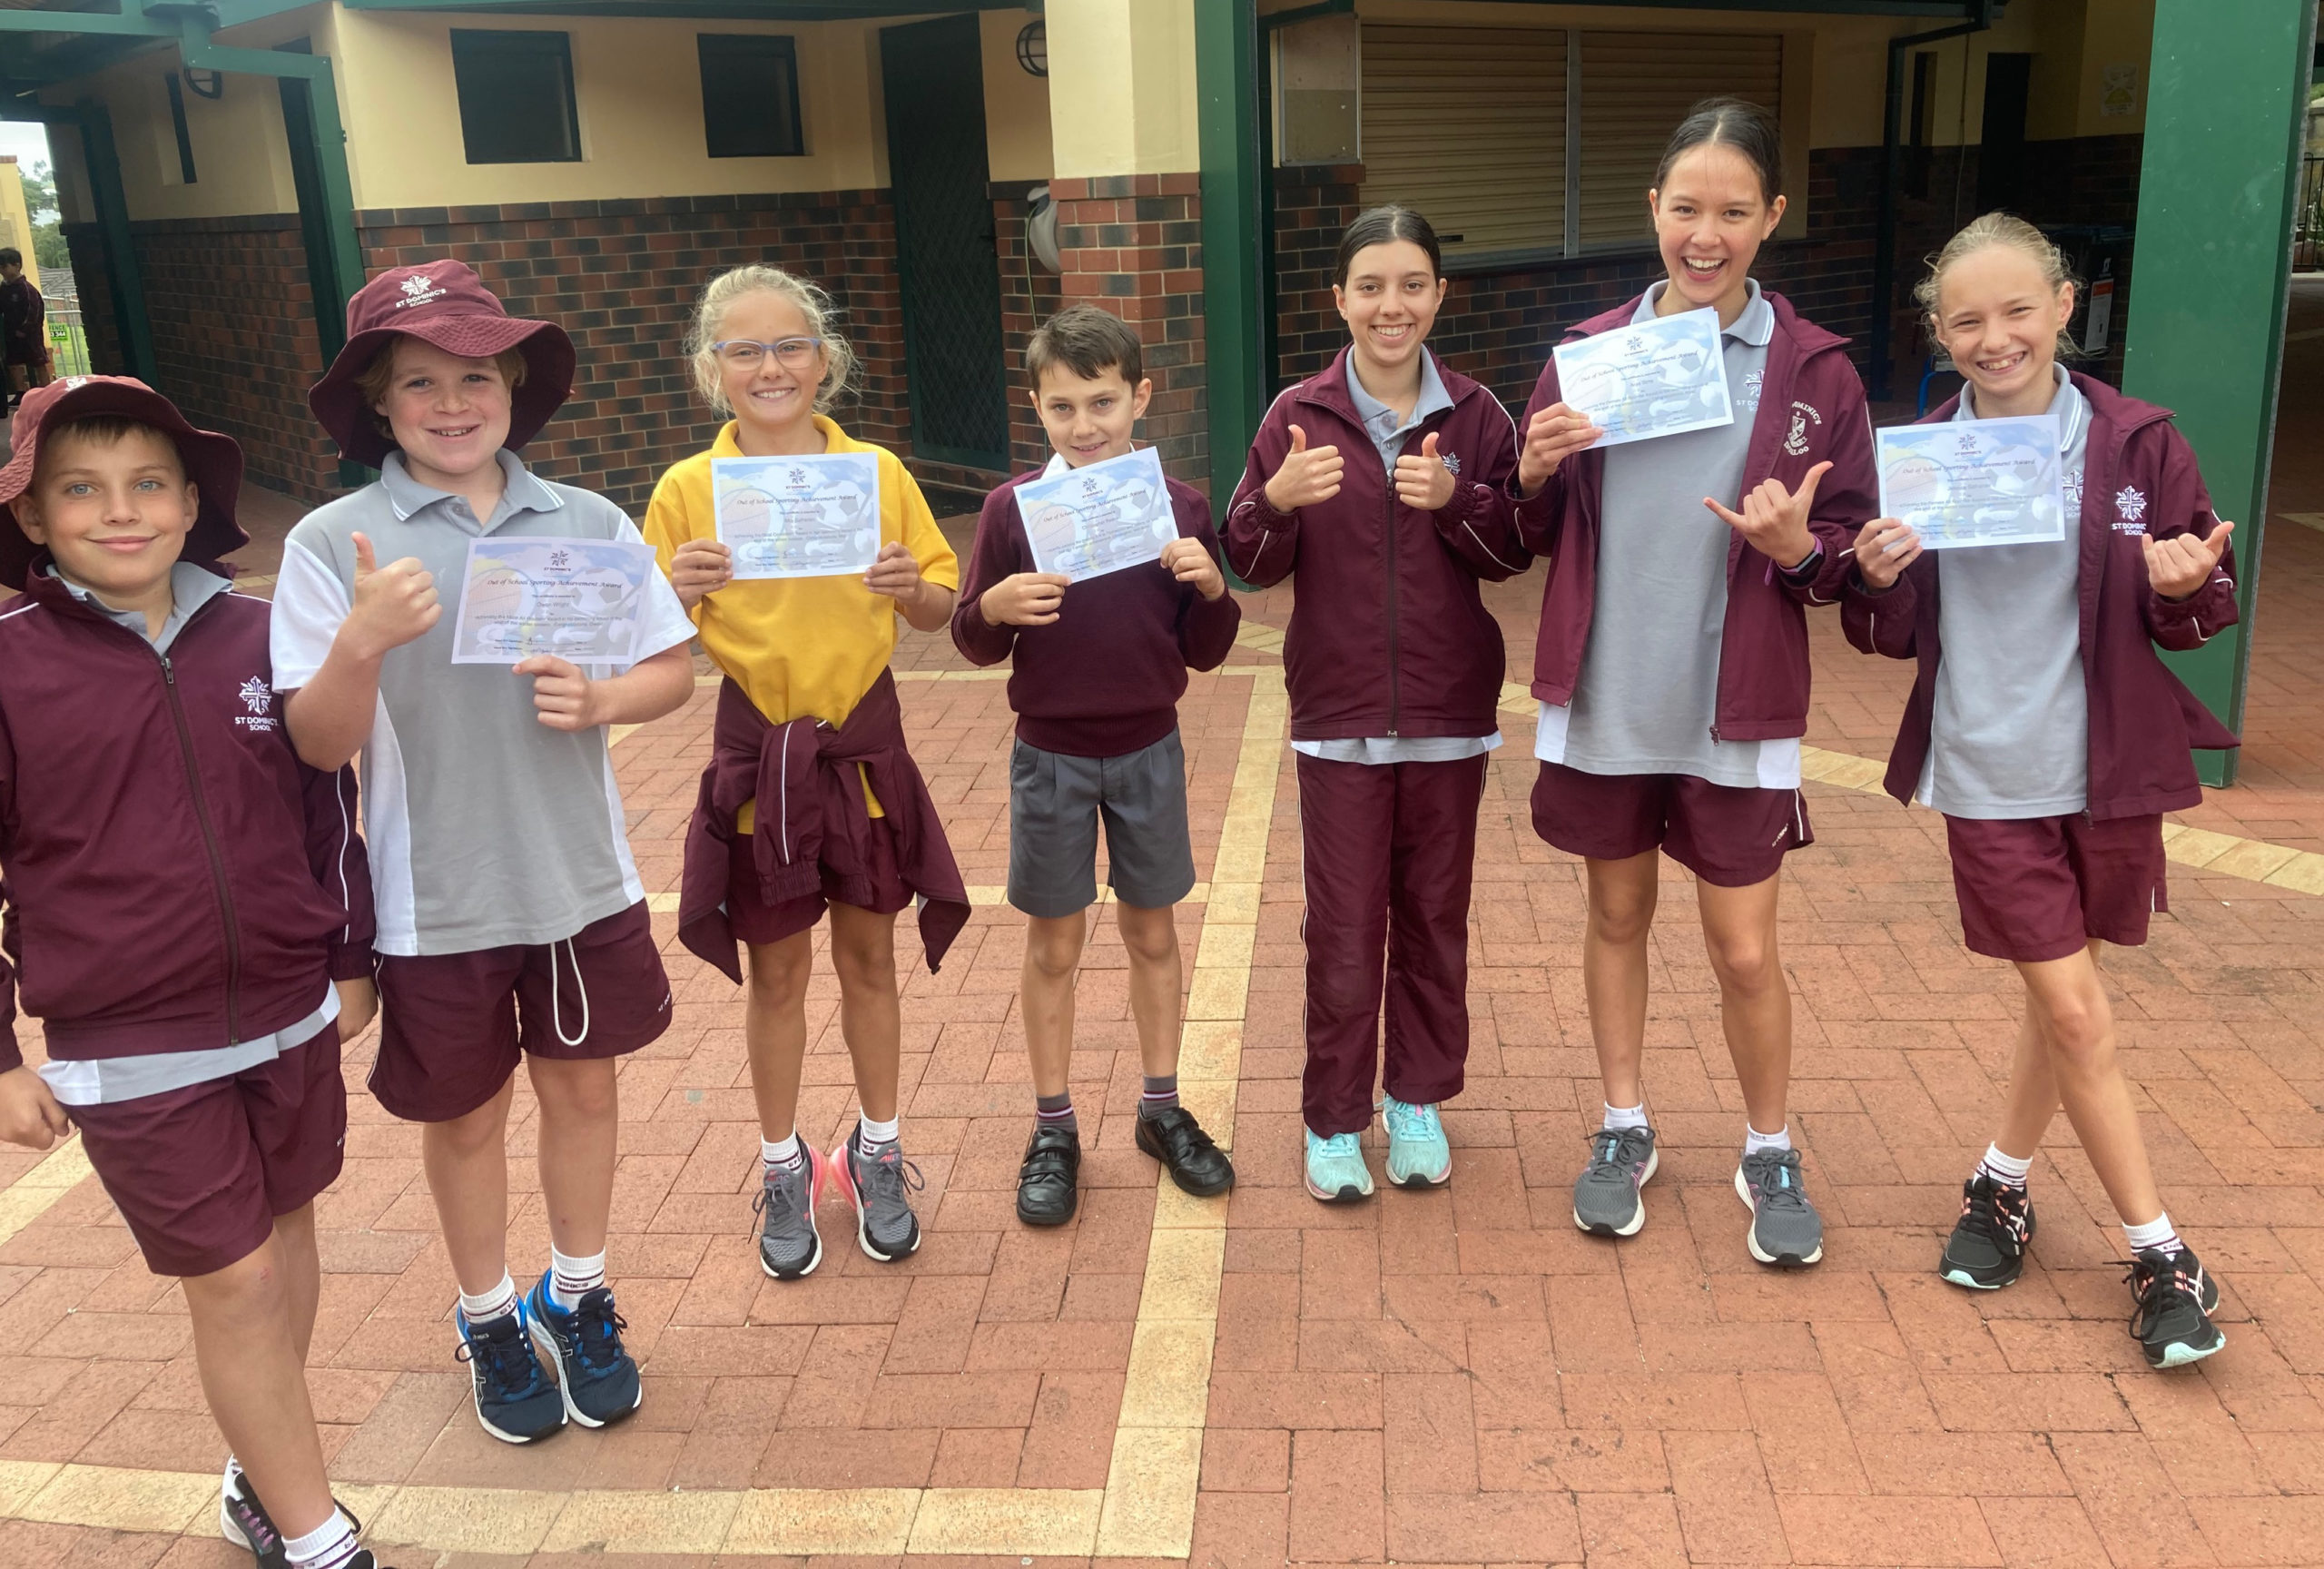 Year 6 Student Leadership Team Update (Out of School Achievement Awards)